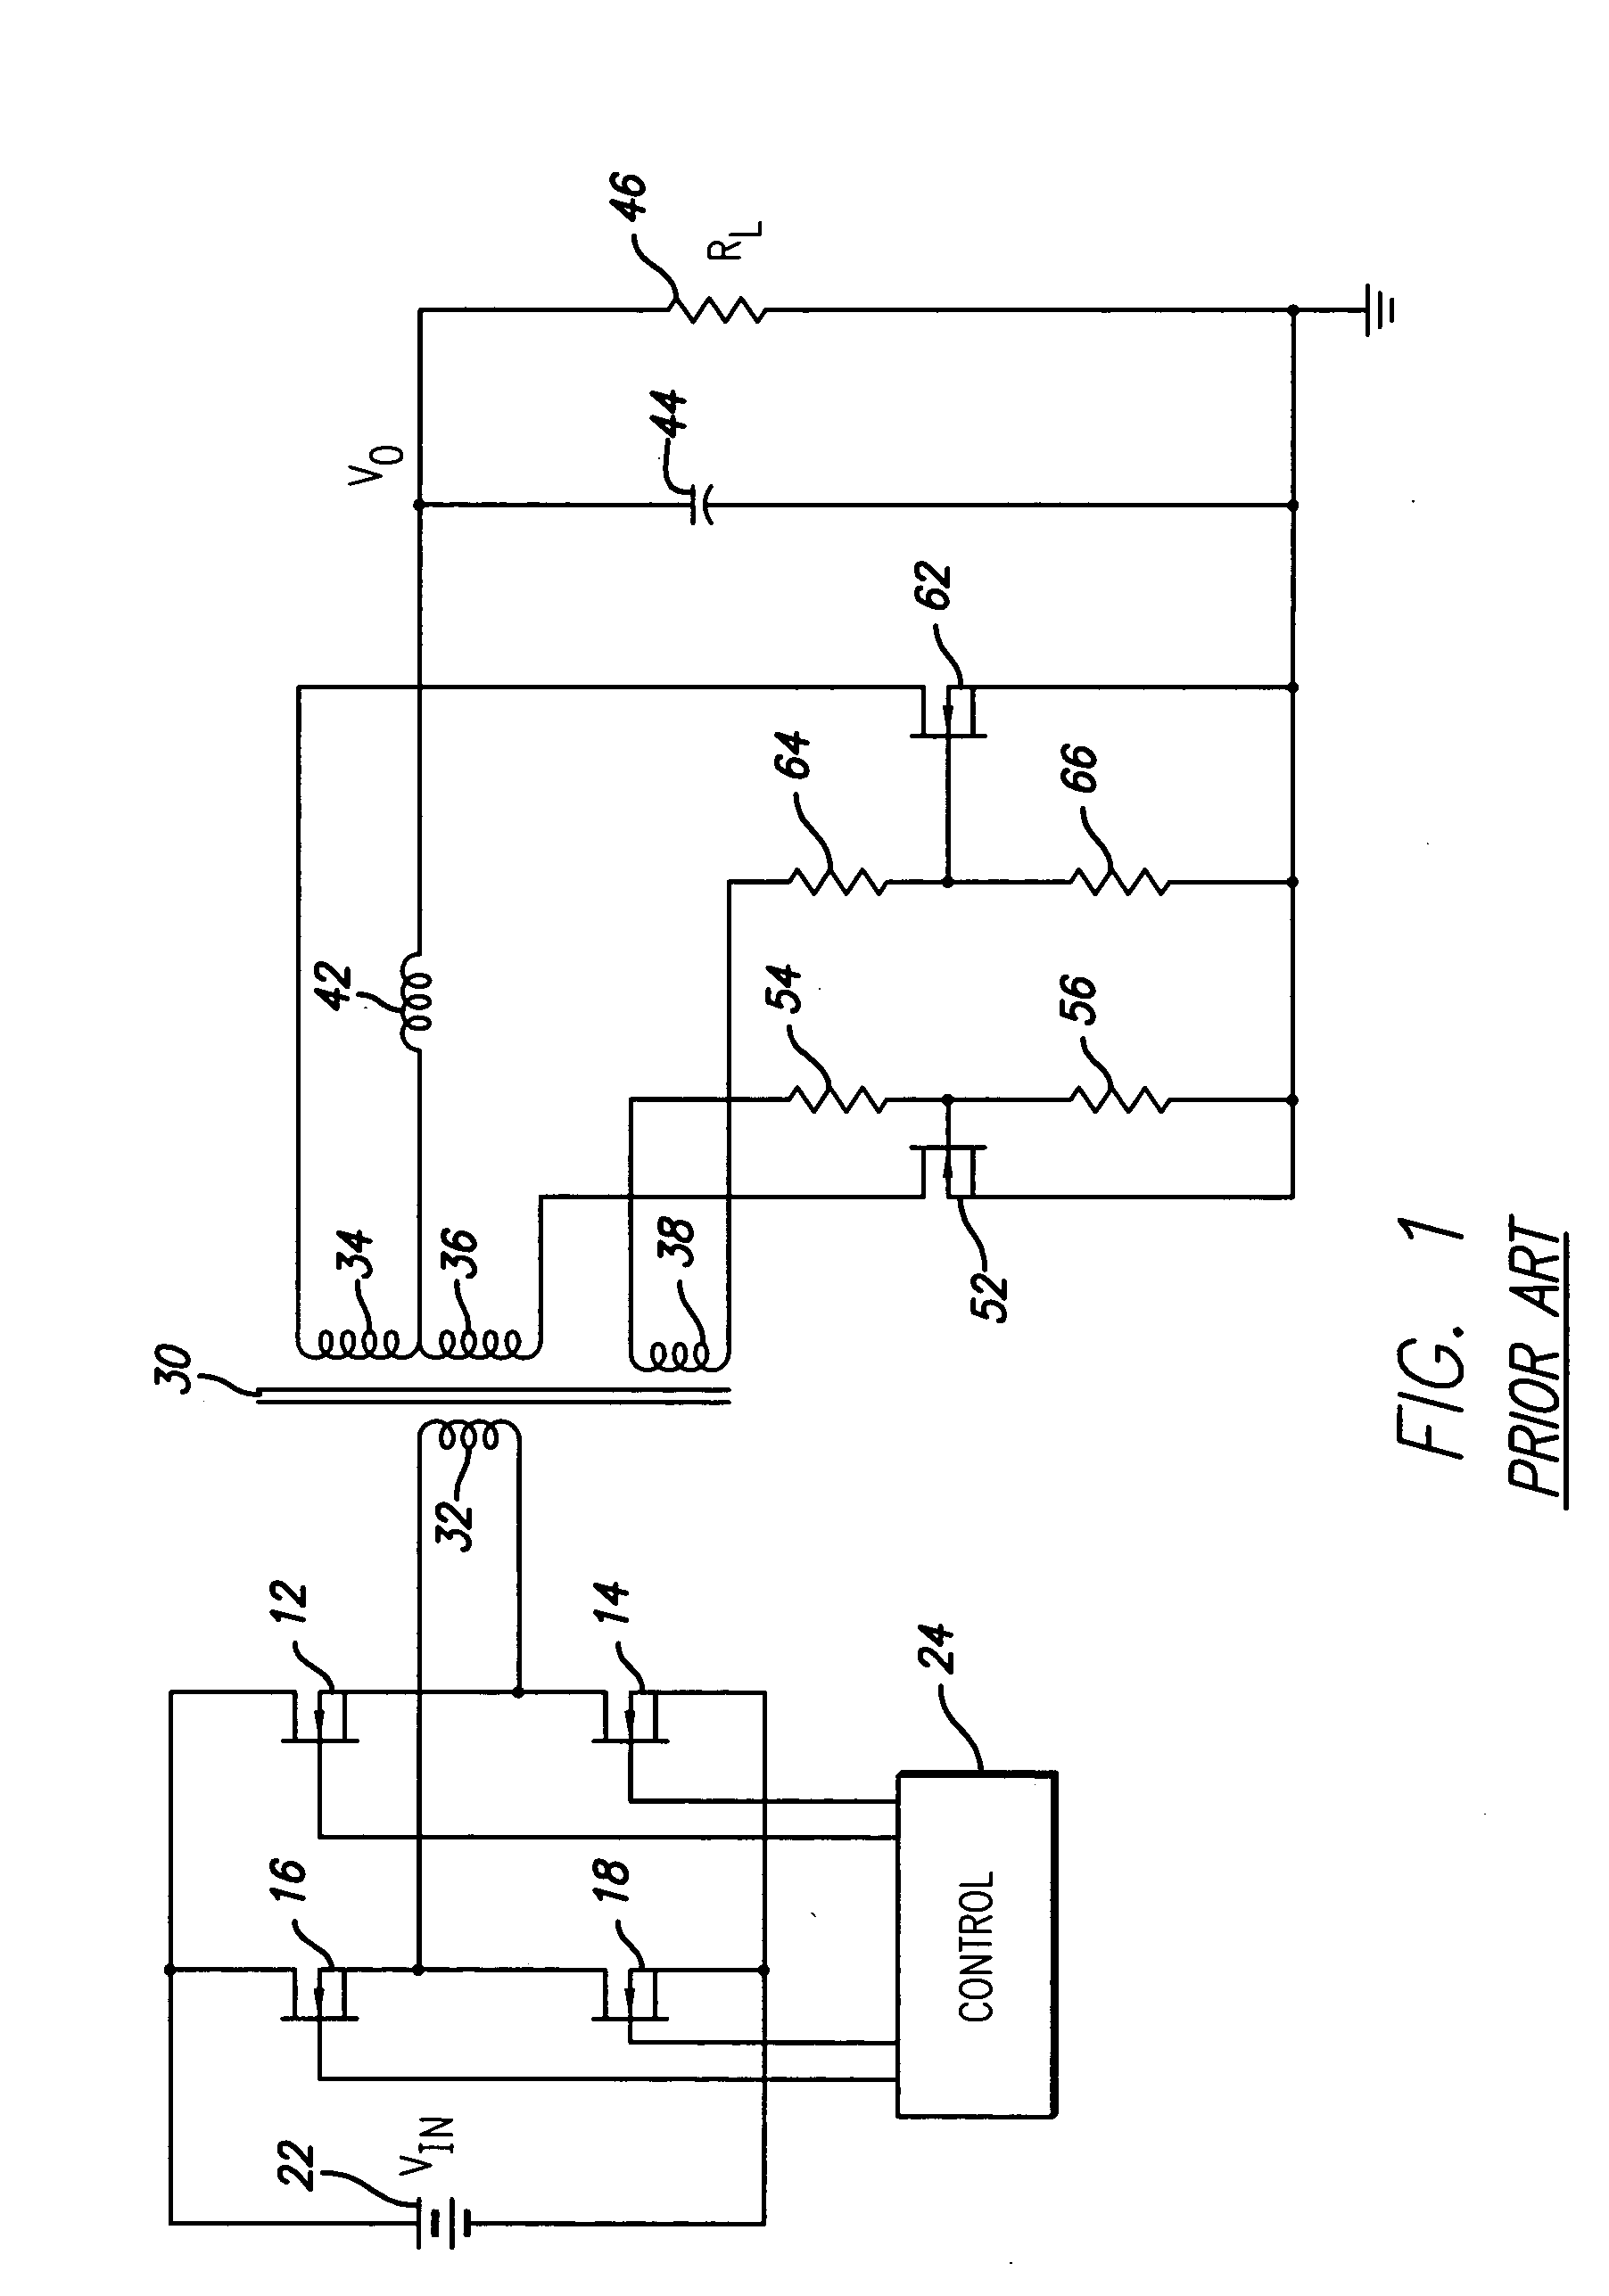 Unregulated DC-DC converter having synchronous rectification with efficient gate drives